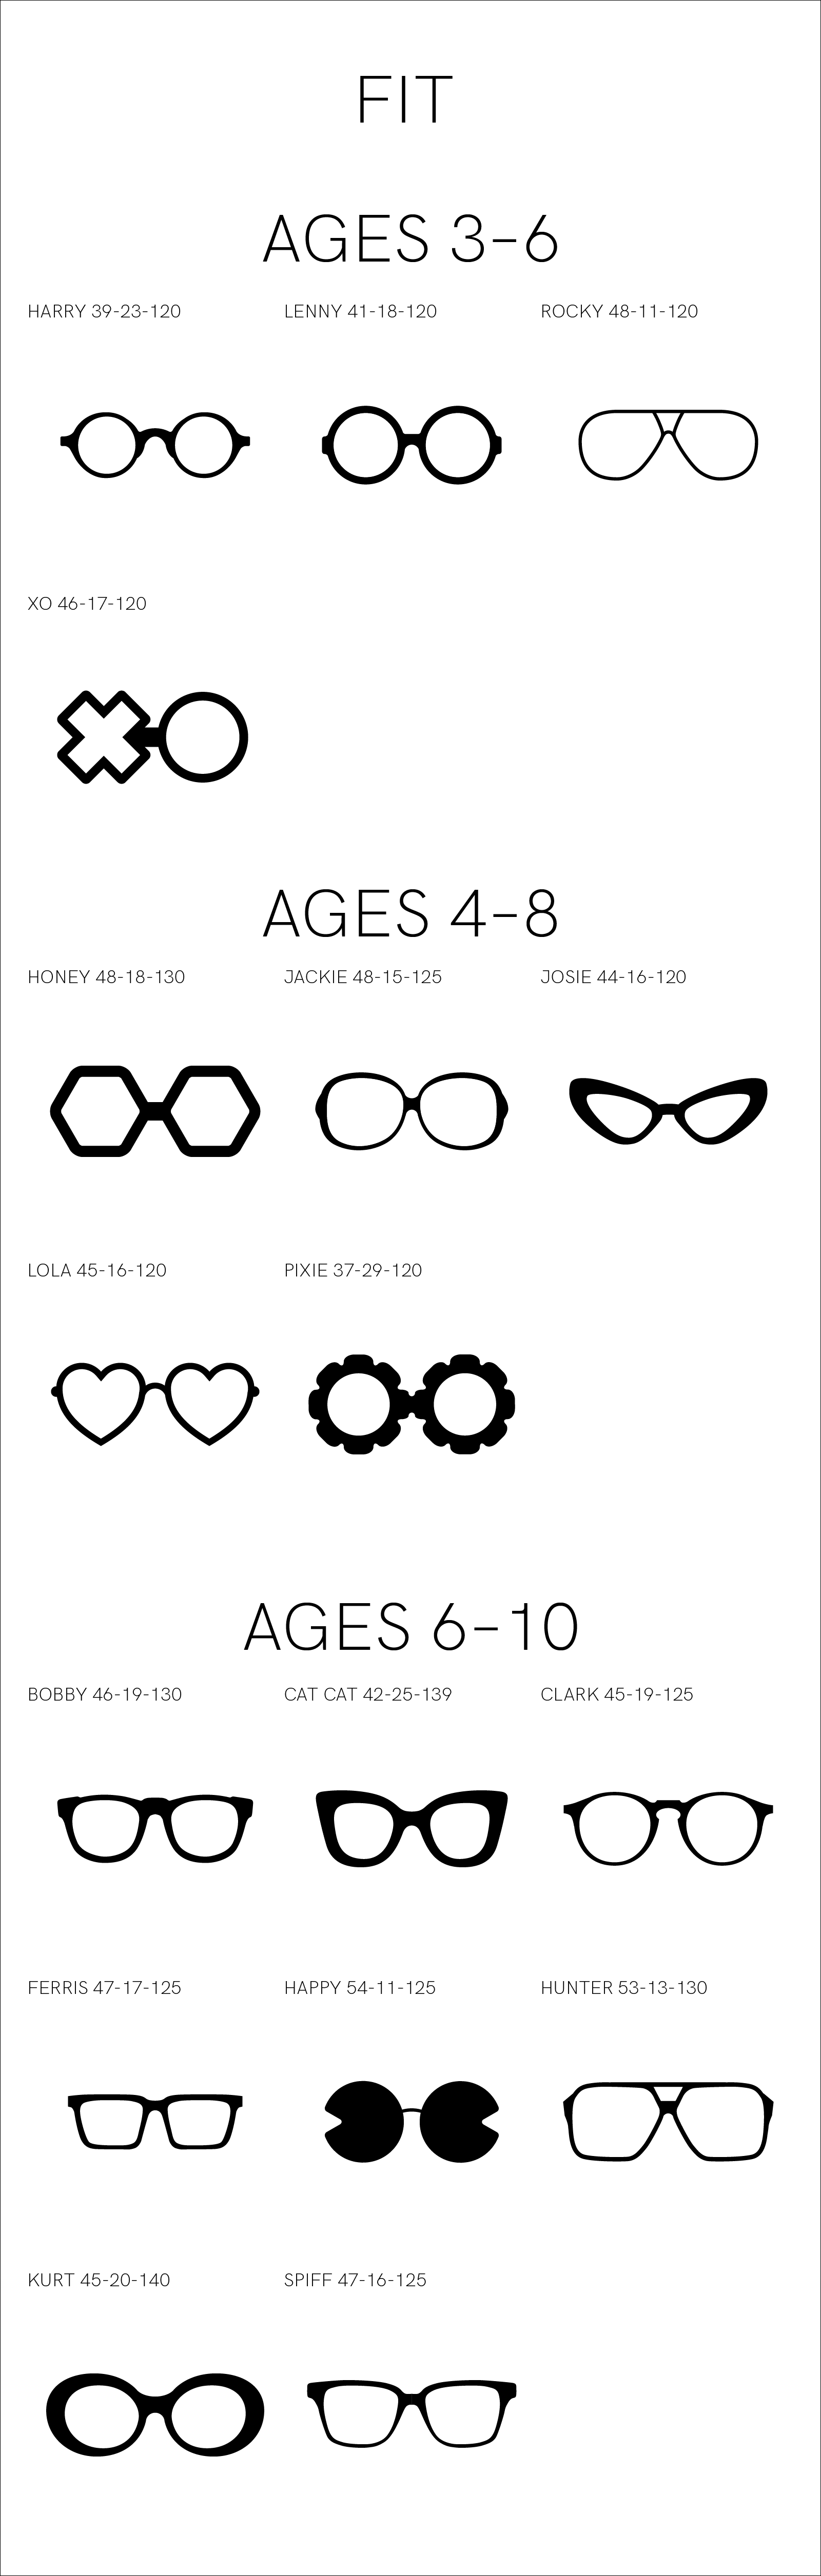 Fit by Age